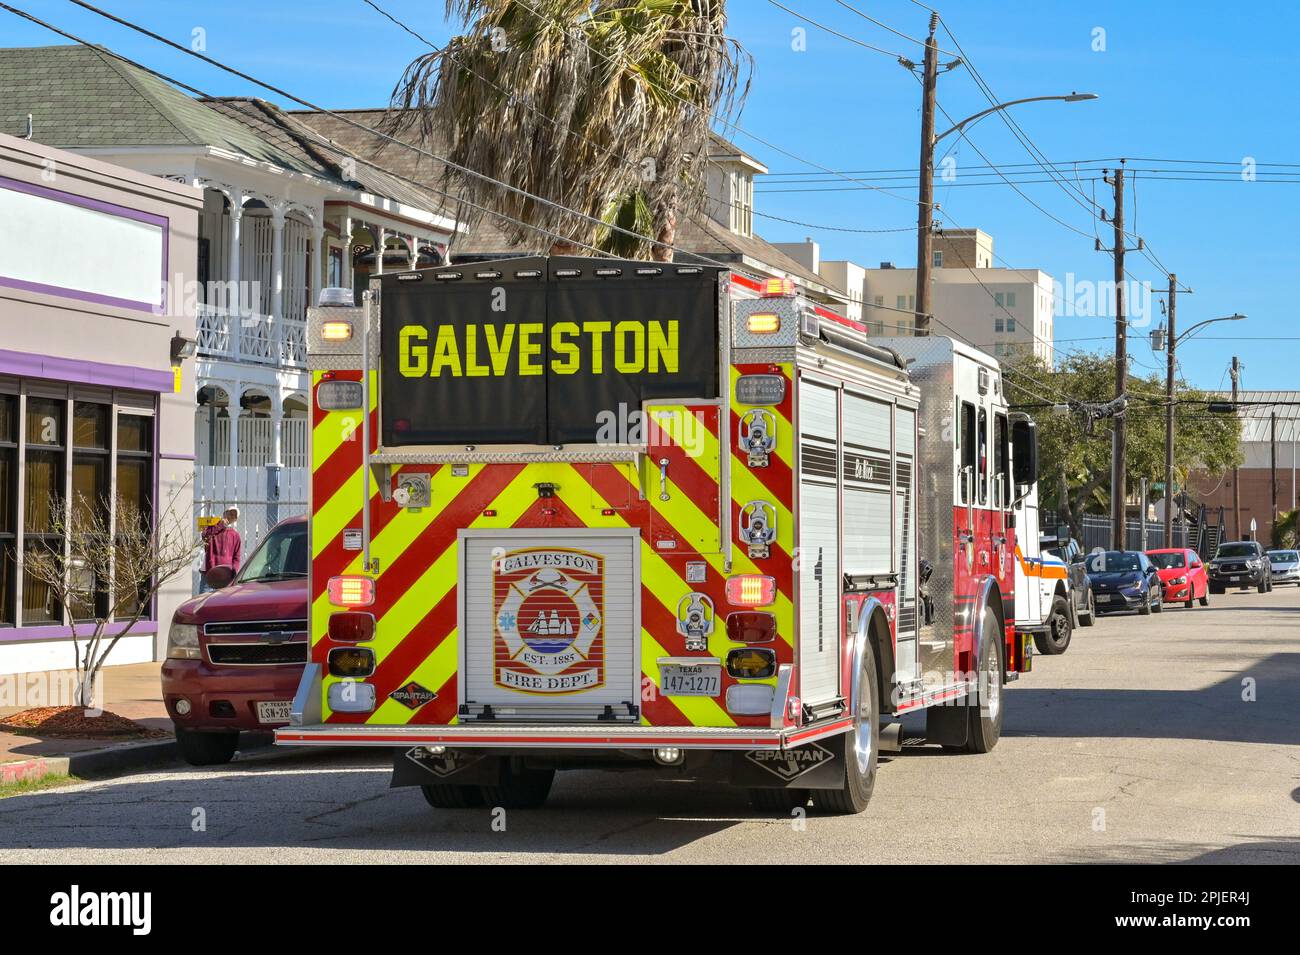 Galveston, Texas, USA - February 2023: Fire department truck with lights flashing stopped on one of the city's streets Stock Photo